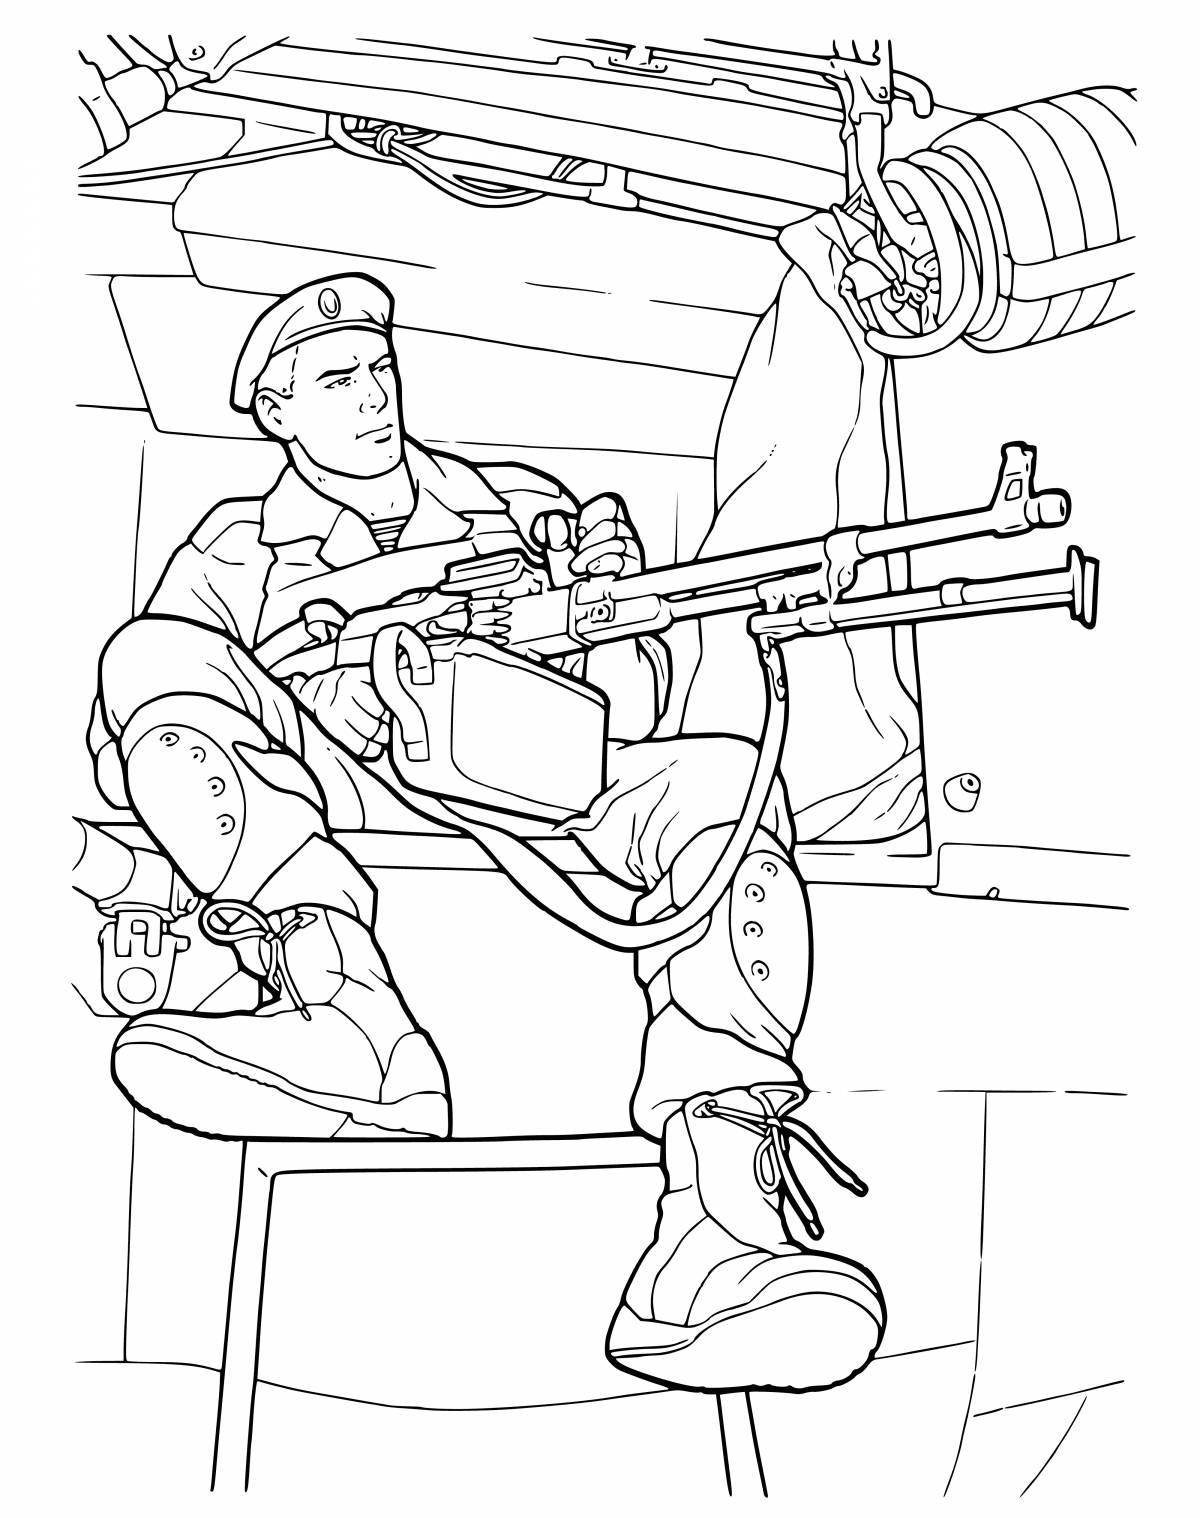 Decisive army coloring page